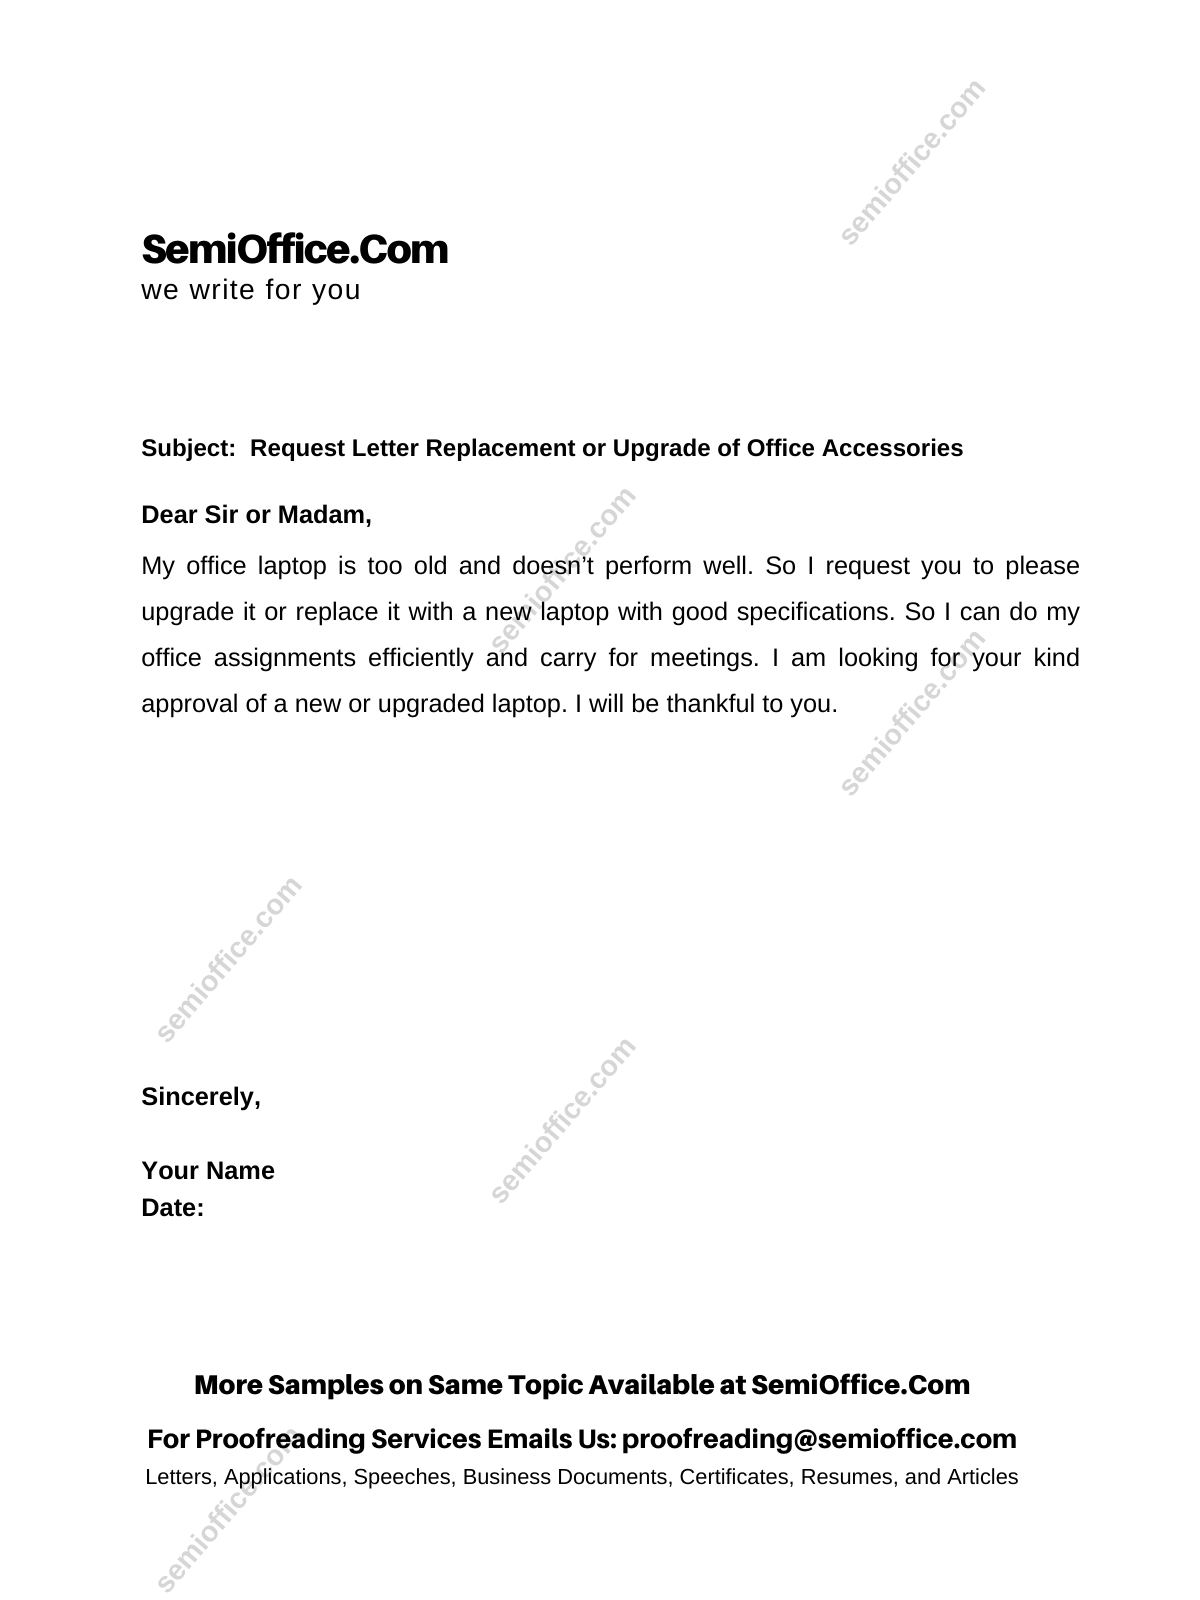 Request Letter For Replacement Or Upgrade Of Office Accessories SemiOffice Com